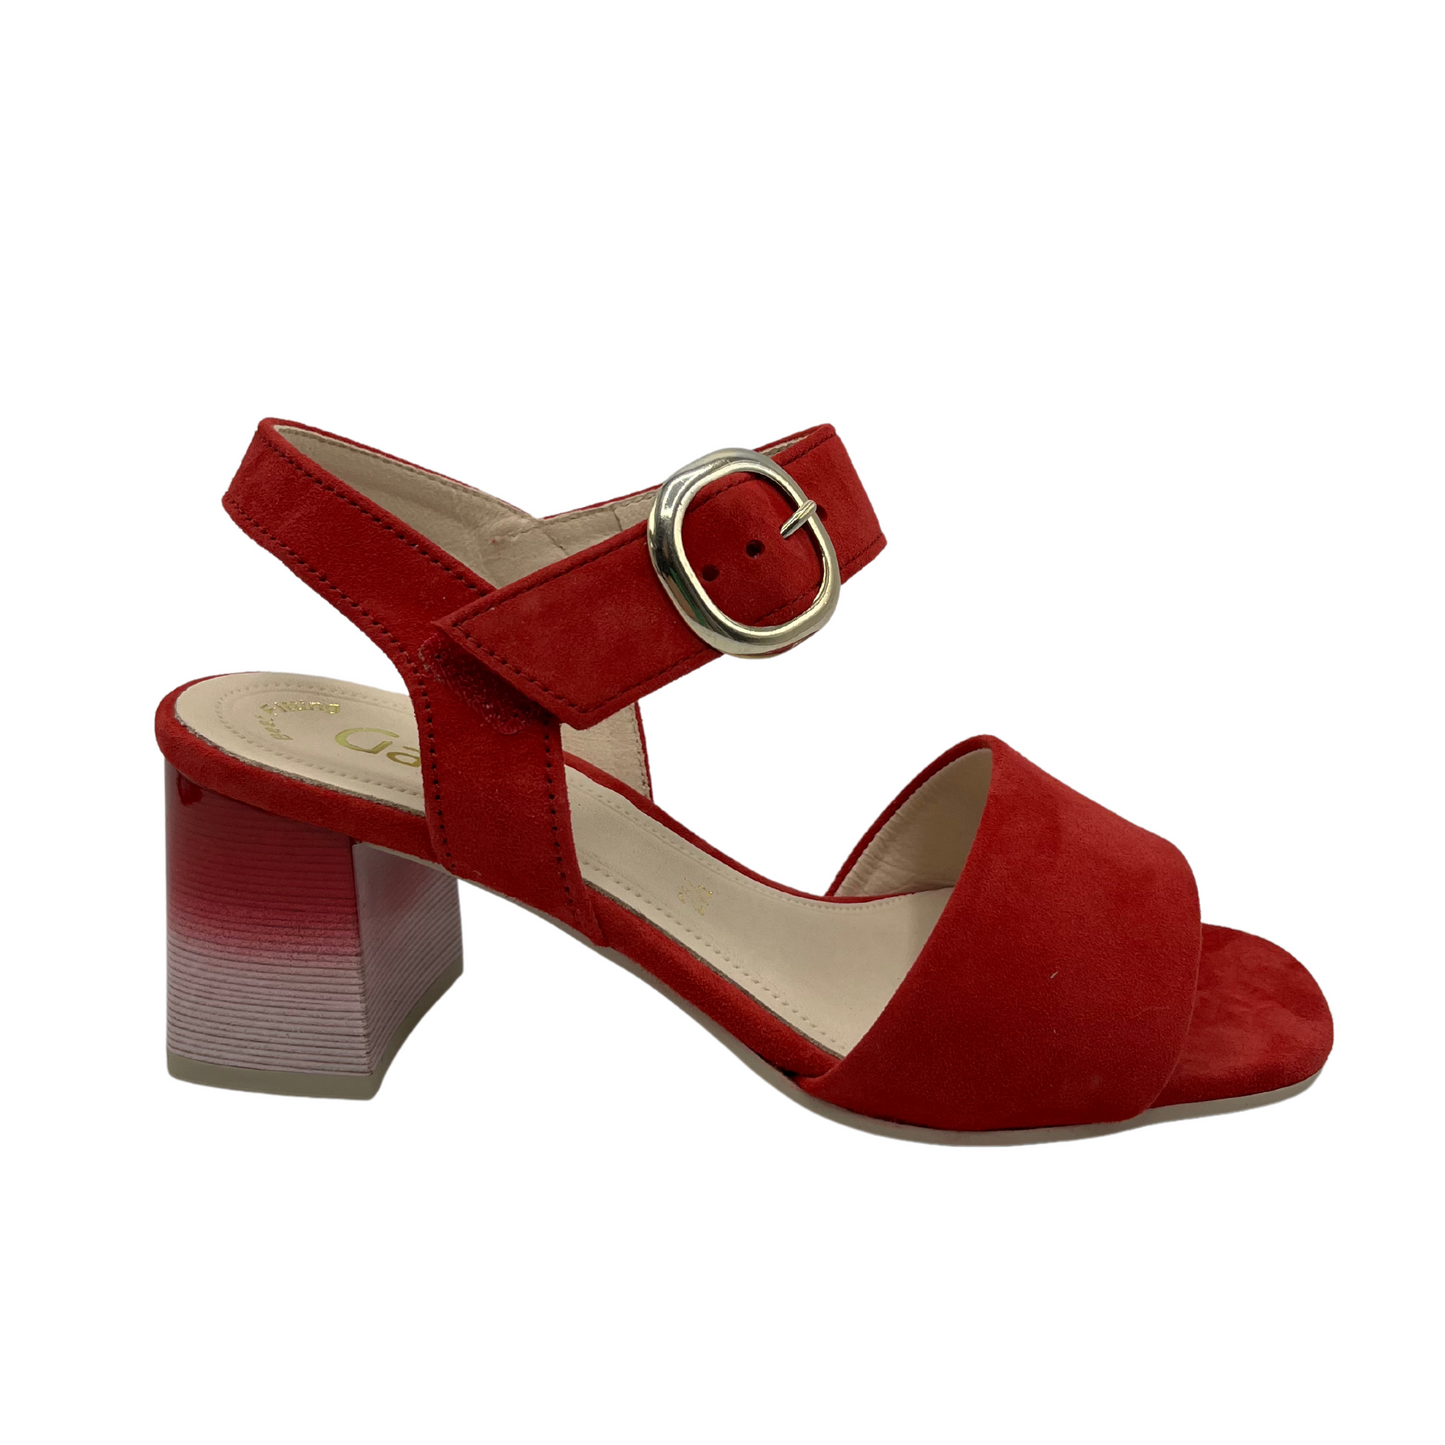 Right facing view of red high heeled sandal with soft square toe and silver buckle on the strap